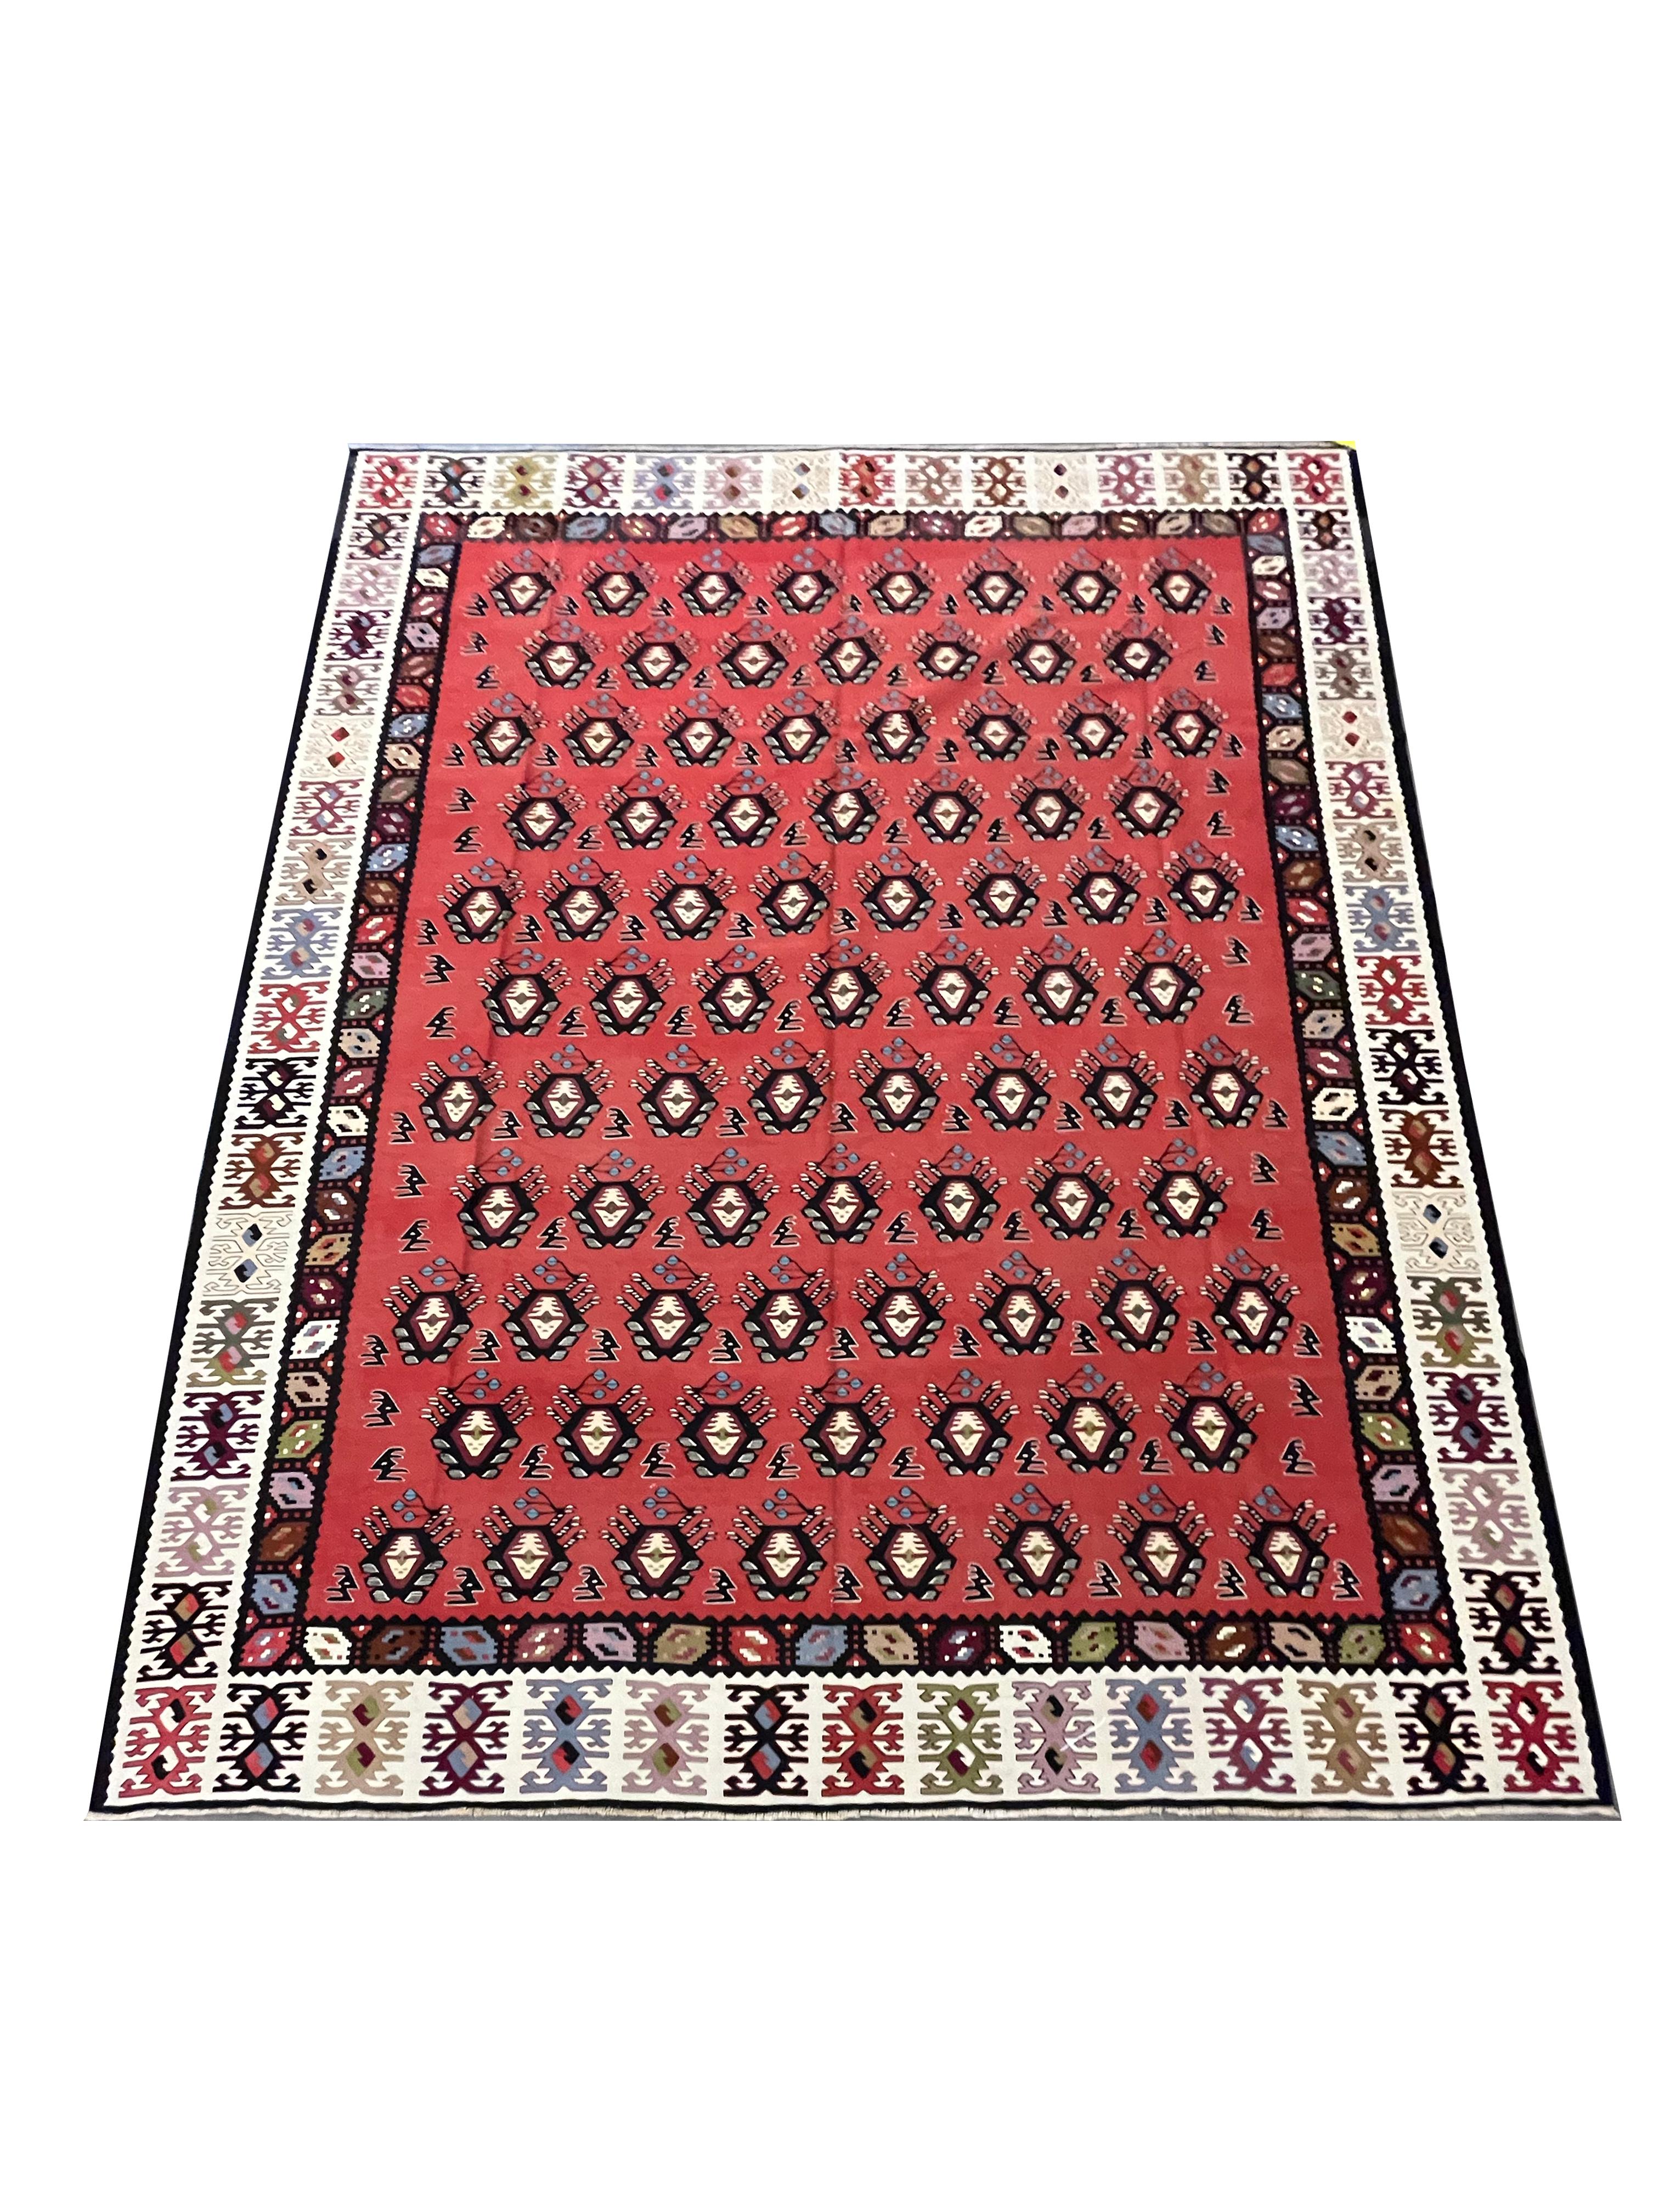 This bold red kilim is a traditional flatwoven area rug woven by hand circa 1900. The design features a geometric design woven in bold accents of black green and blue on a beautiful red background. The stripe design is eyecatching and so this piece